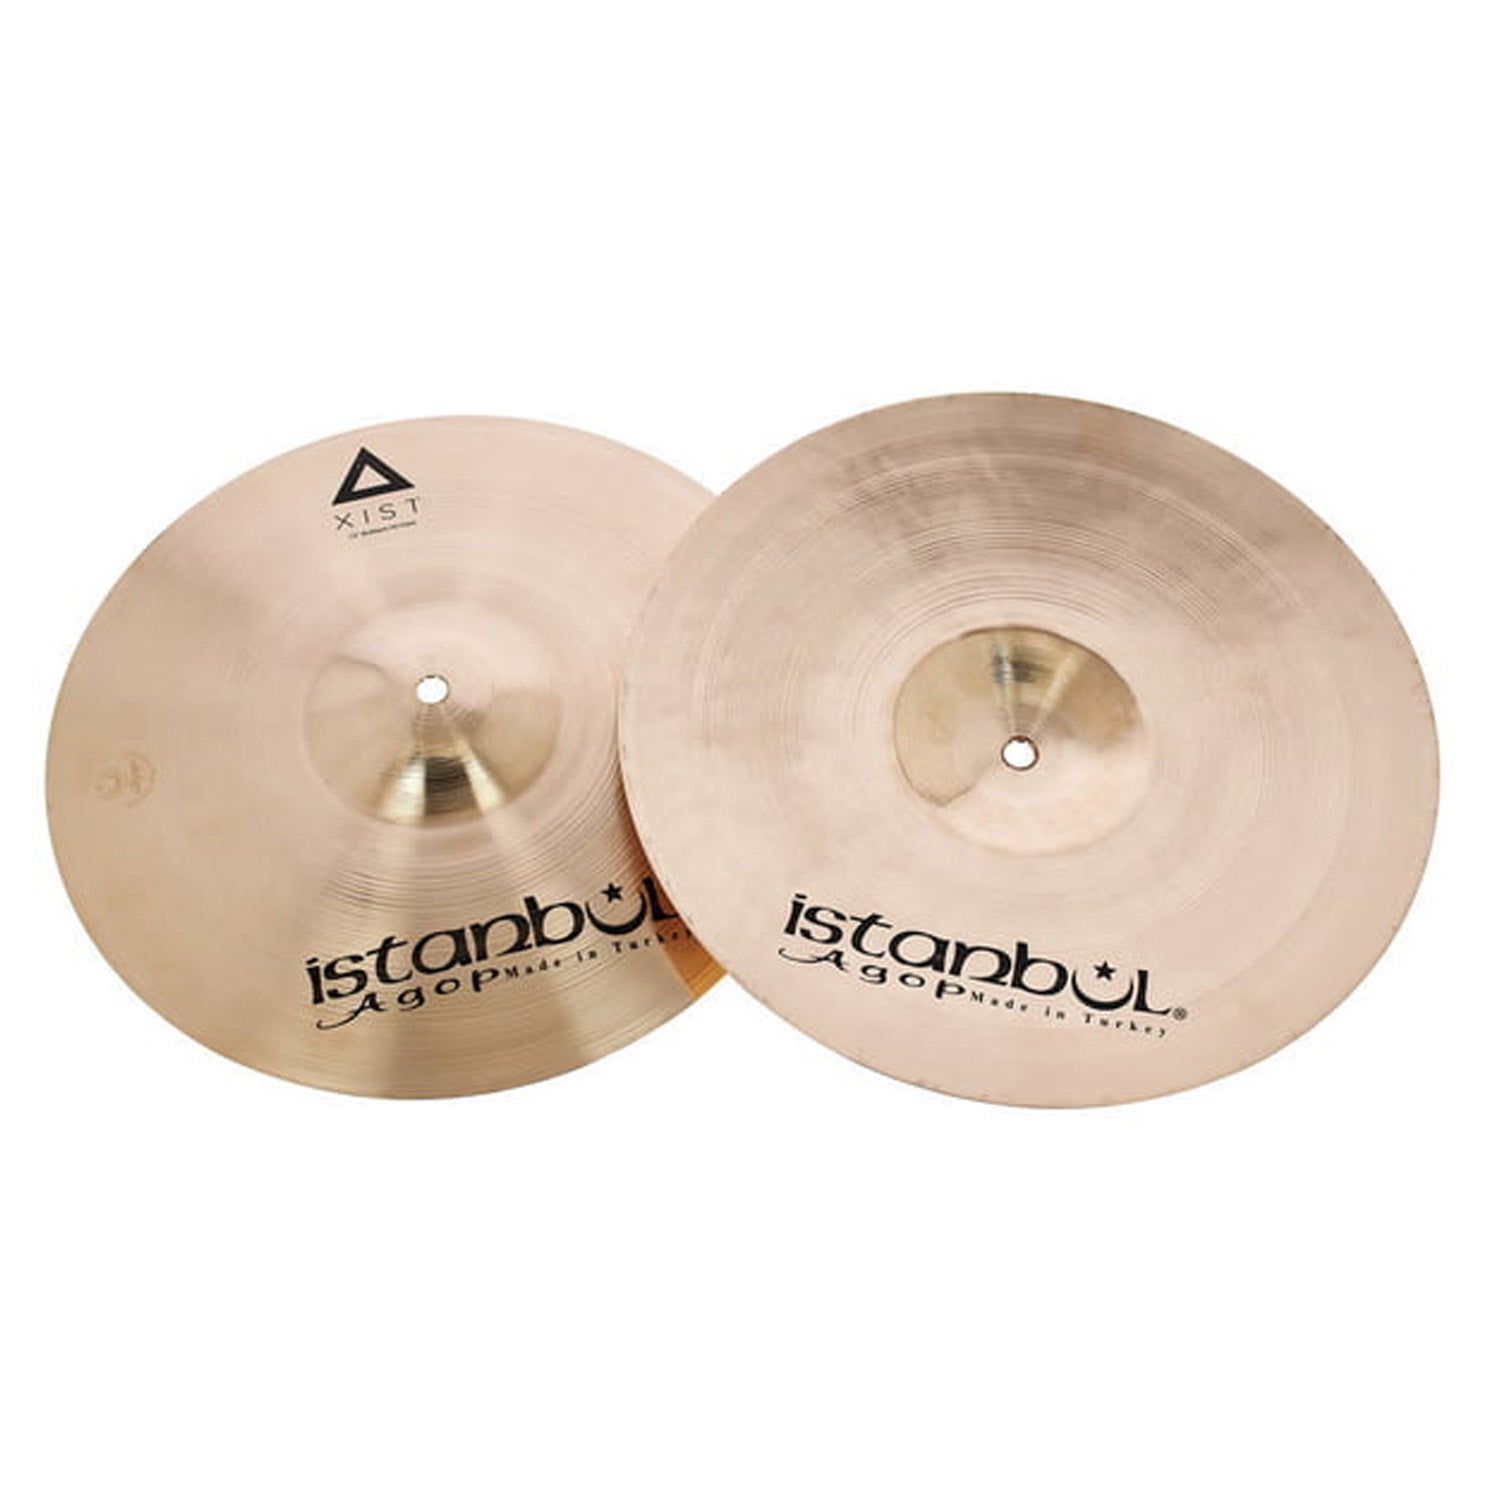 Istanbul Xh13 Agop Xist Series 13 Inch Hi Hats Cymbals Pair | Music